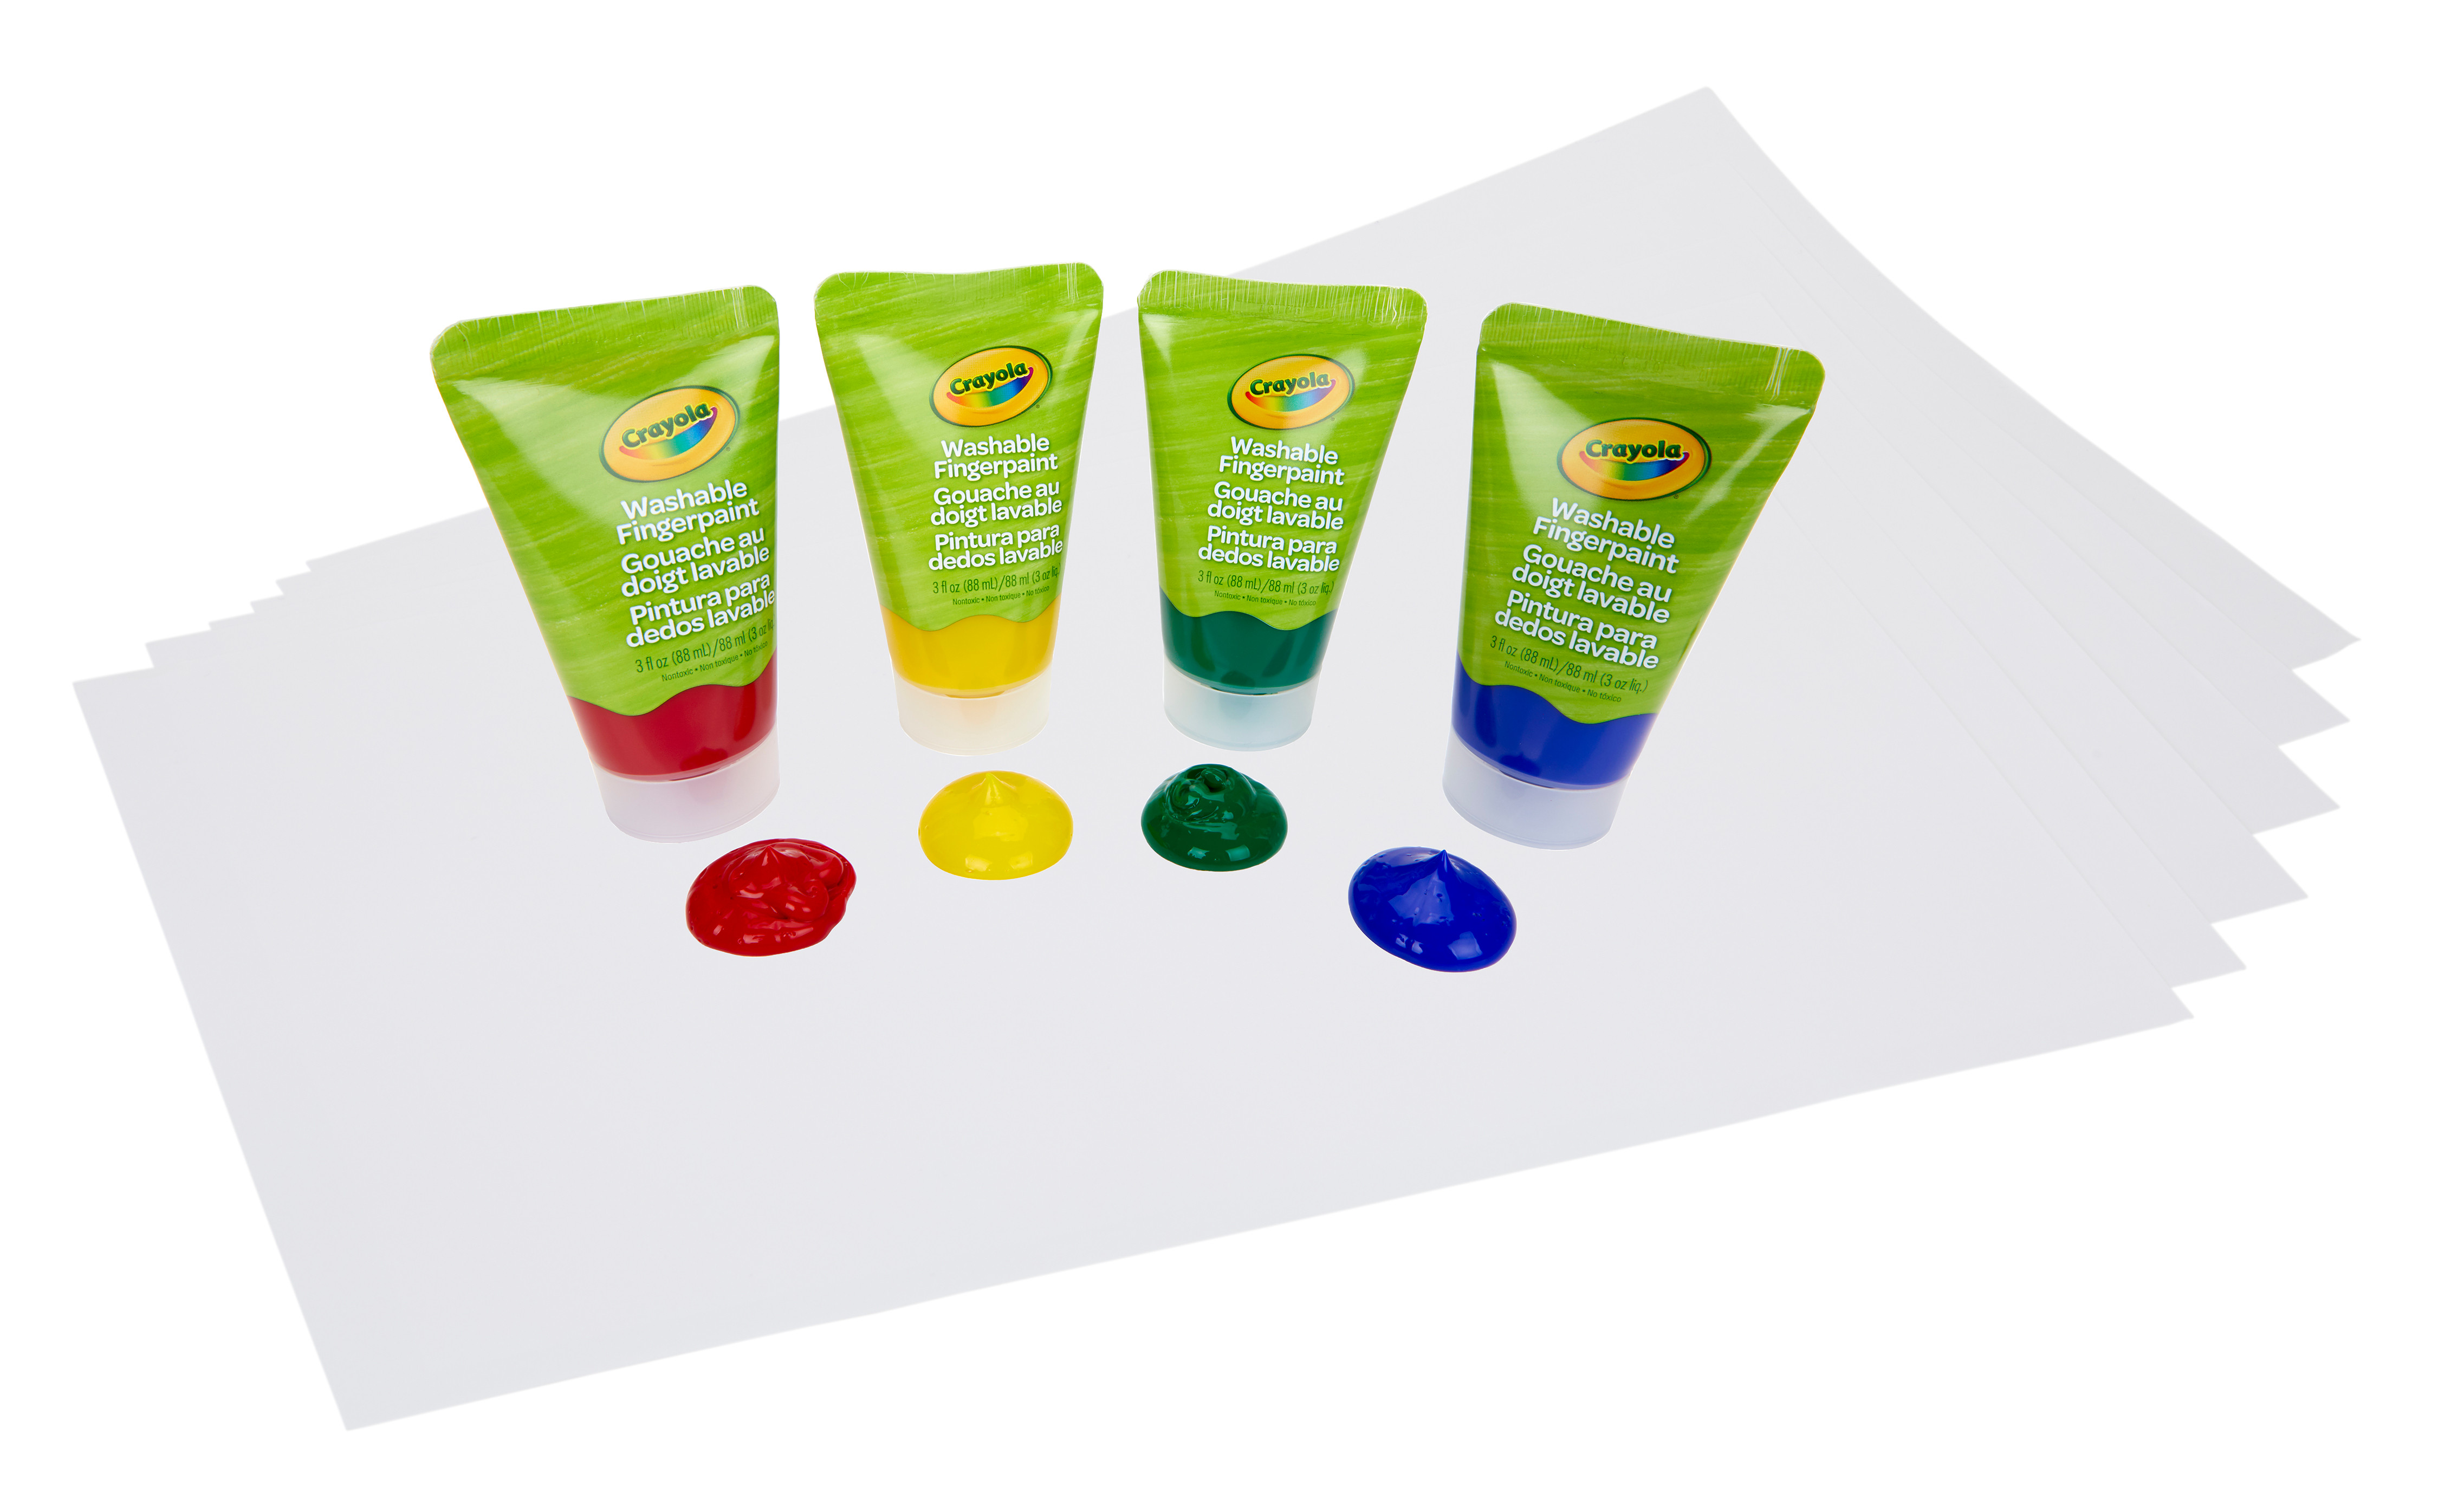 Crayola Washable Finger Paint Set, Toddler Paint Kit, 4 Tubes of Paint, 10 Sheets of Paper, Gift - image 5 of 8